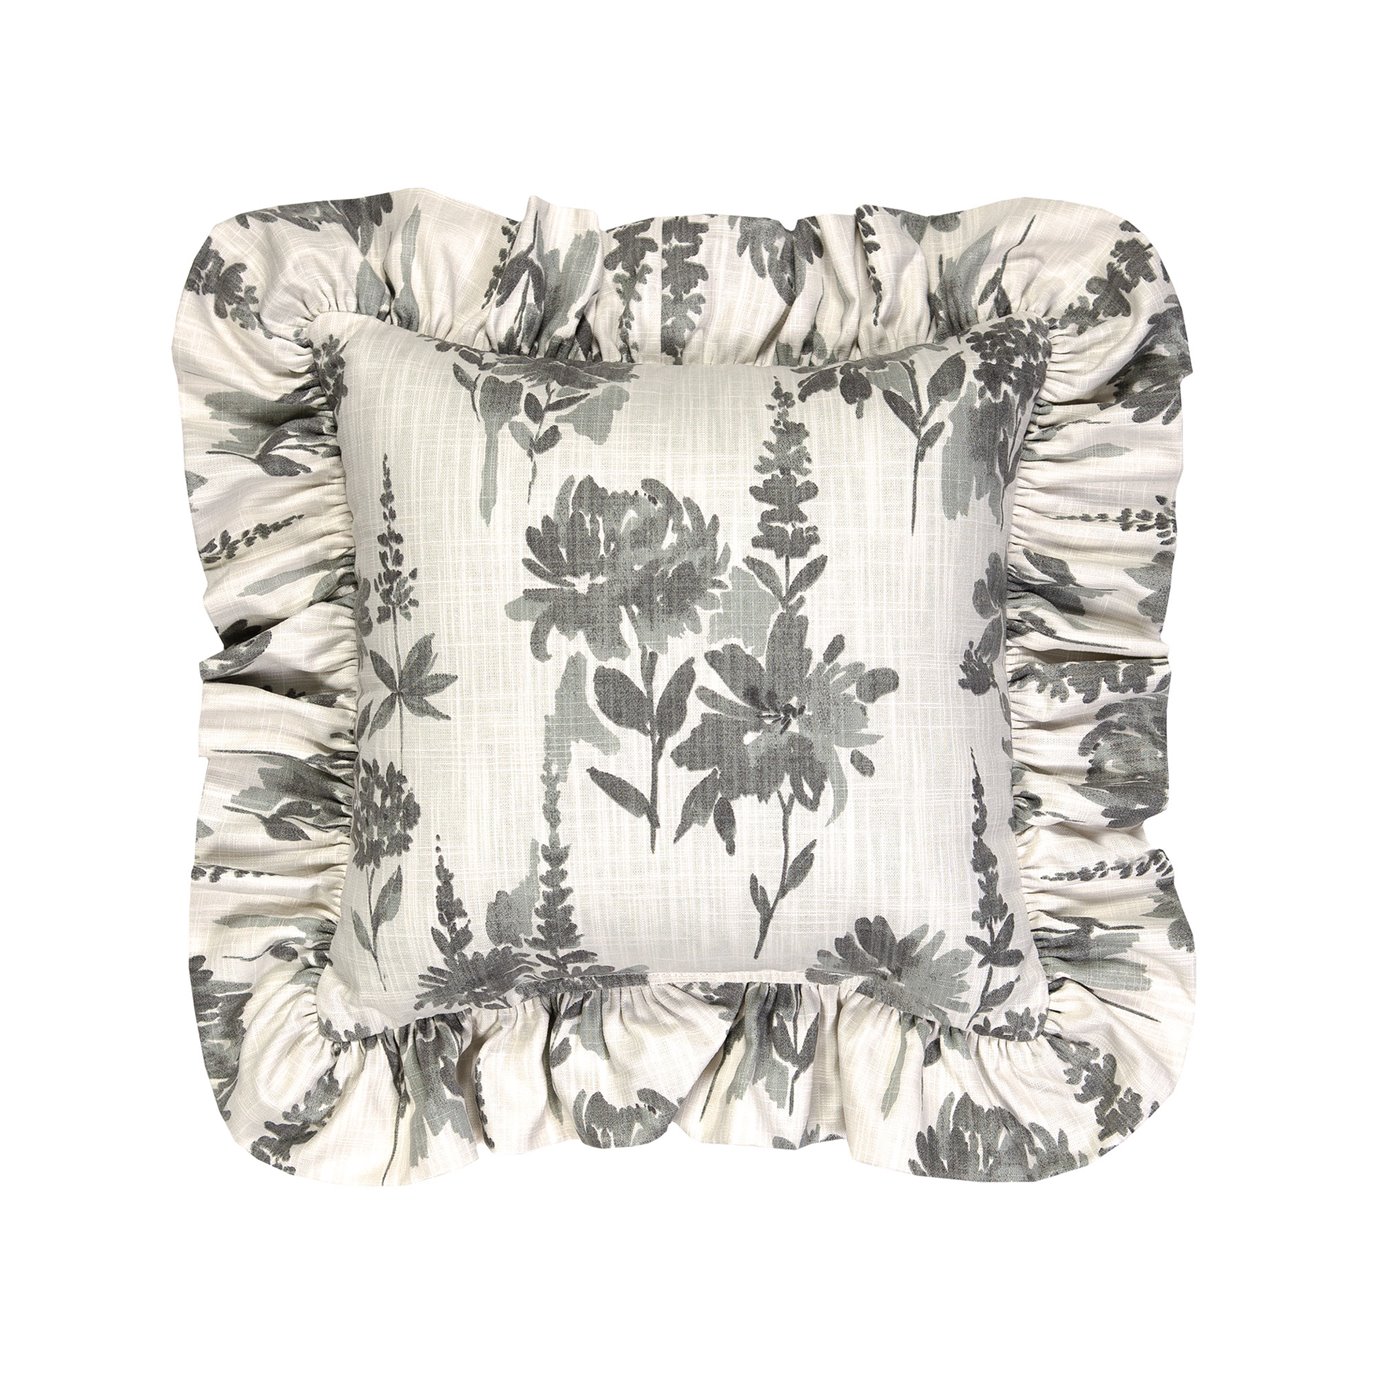 Thomasville Chic Garden Floral Square Pillow